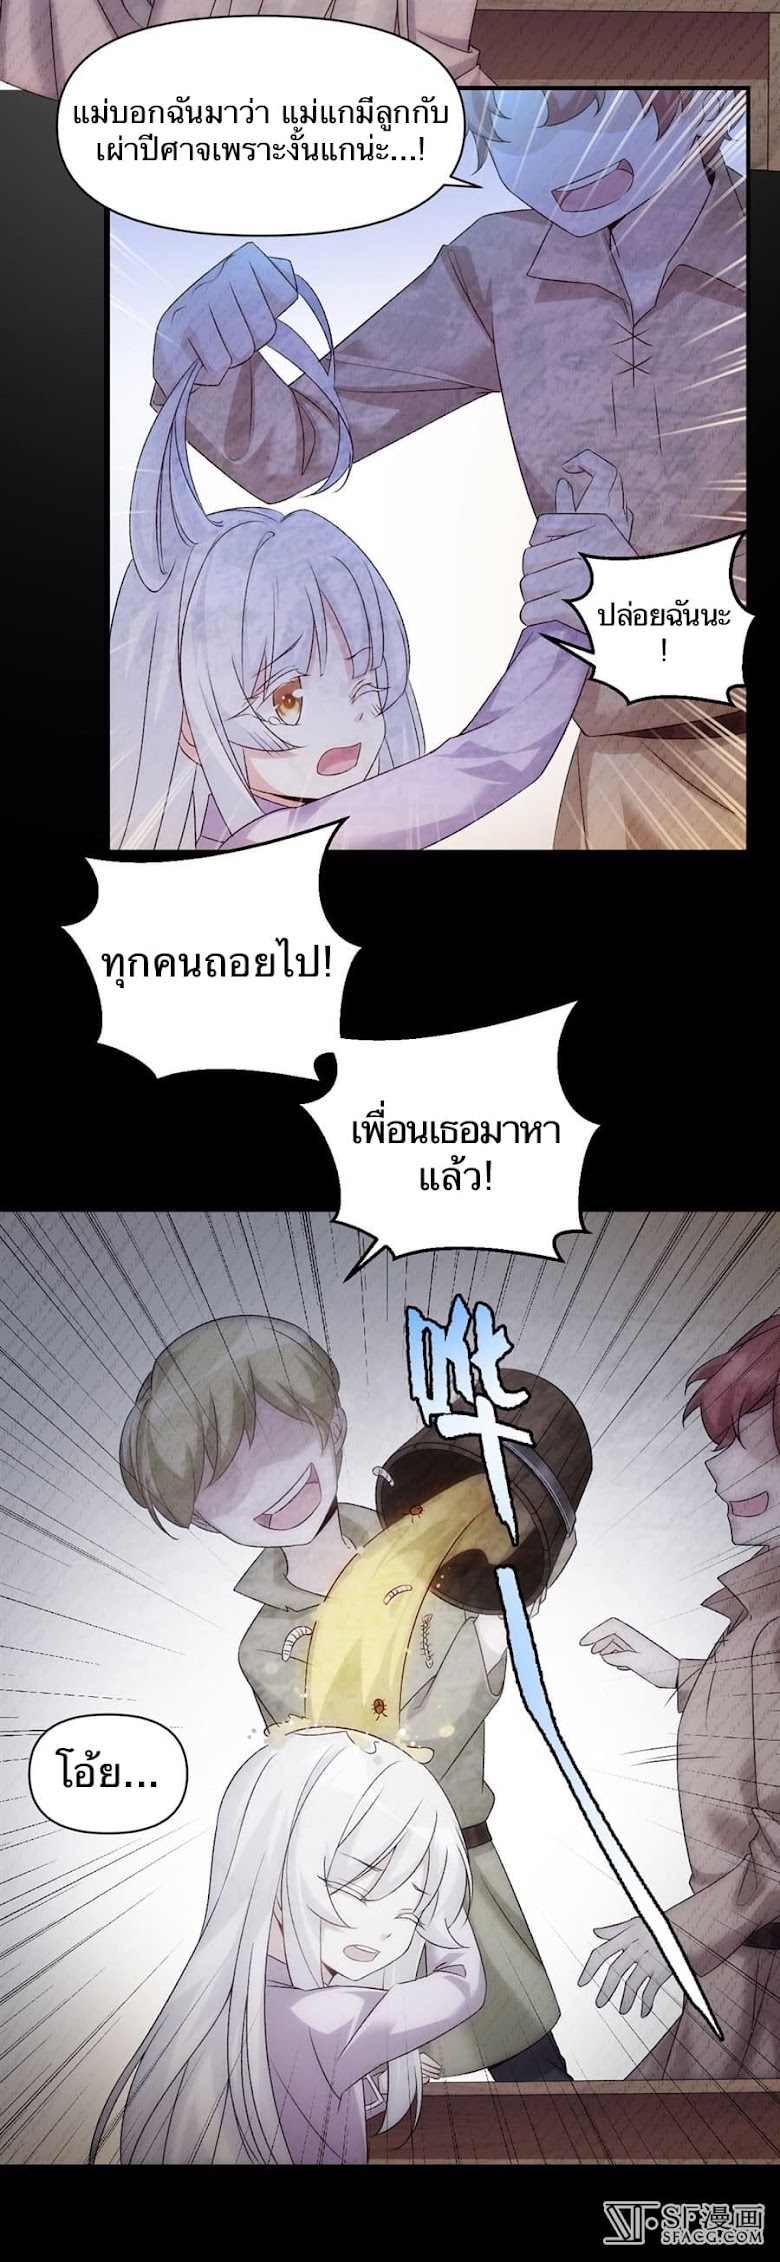 Nobleman and so what? - หน้า 17